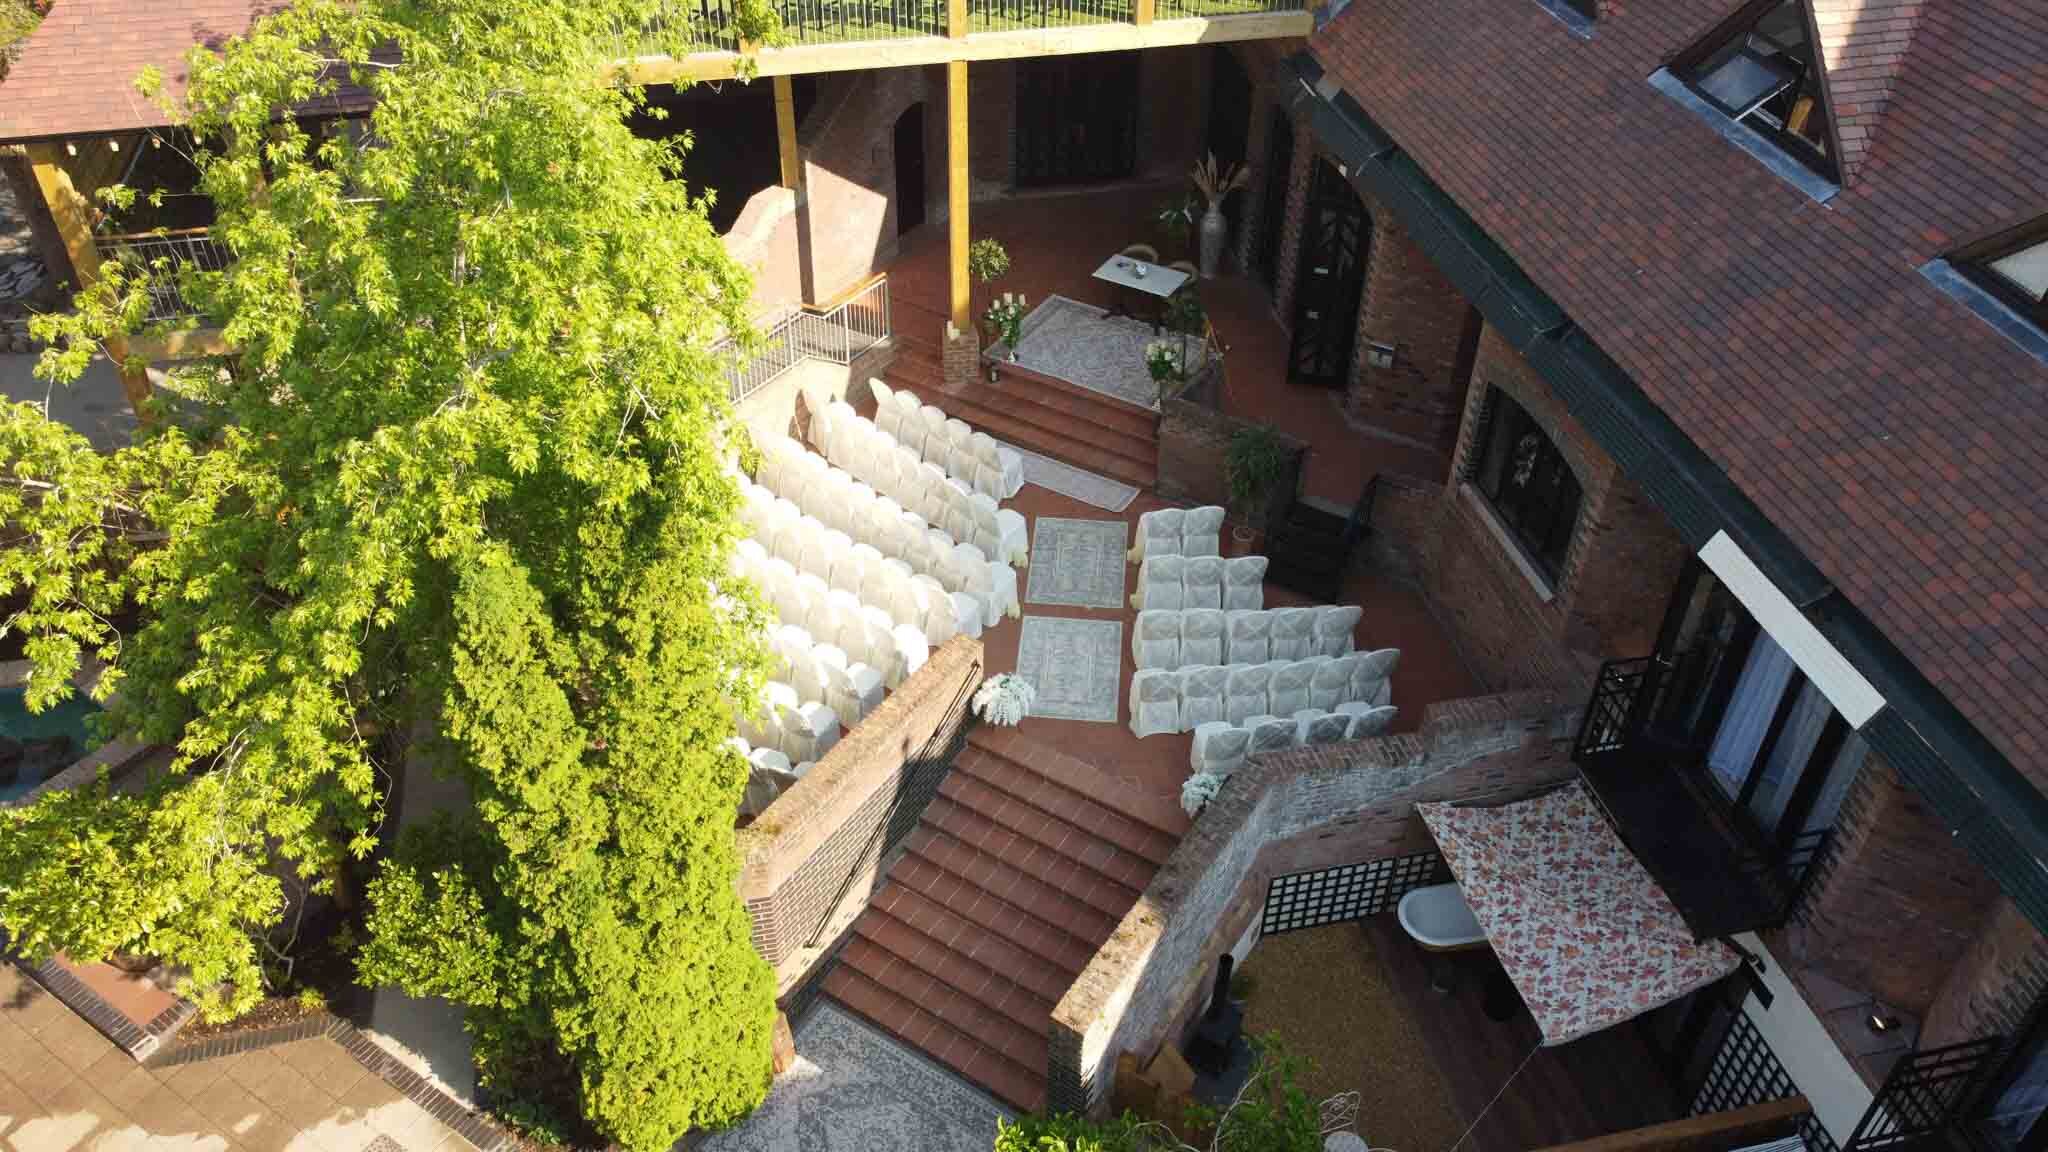  Drone bird's eye view looing down the ceremony at the back with empty chairs waiting for guests to arrive with trees to the left and steps to the garden. 